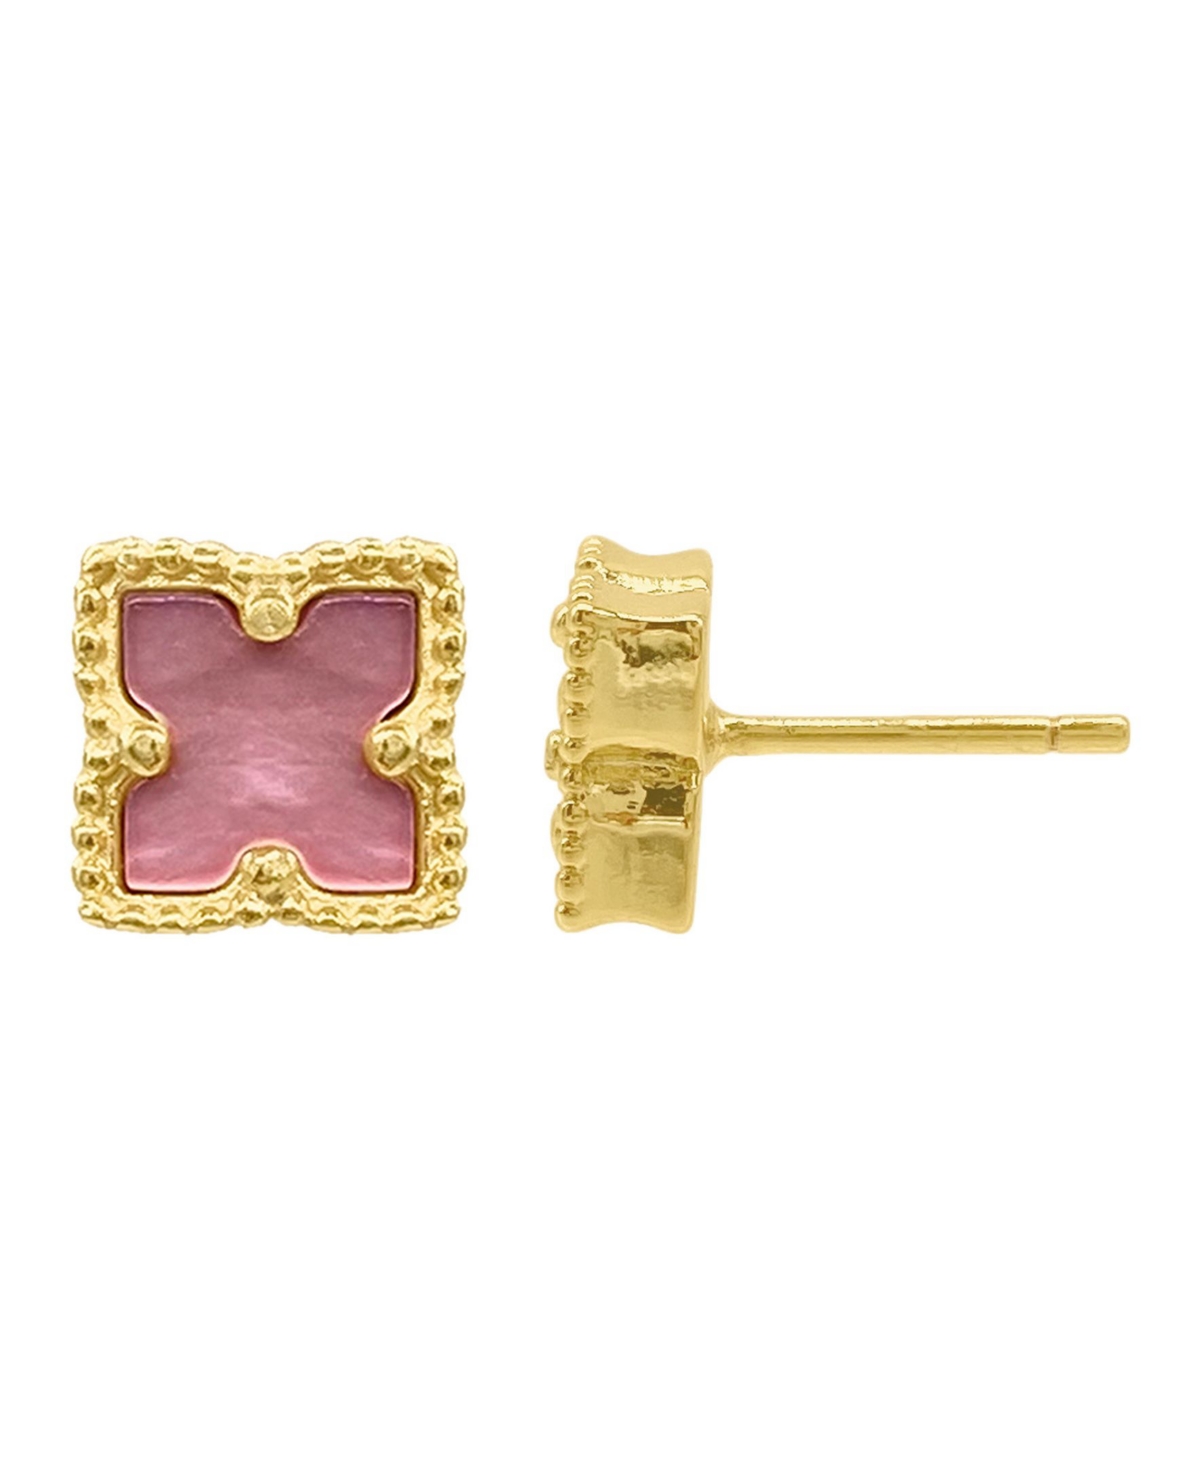 Shop Adornia 14k Gold Plated Flower Pink Imitation Mother Of Pearl Stud Earrings